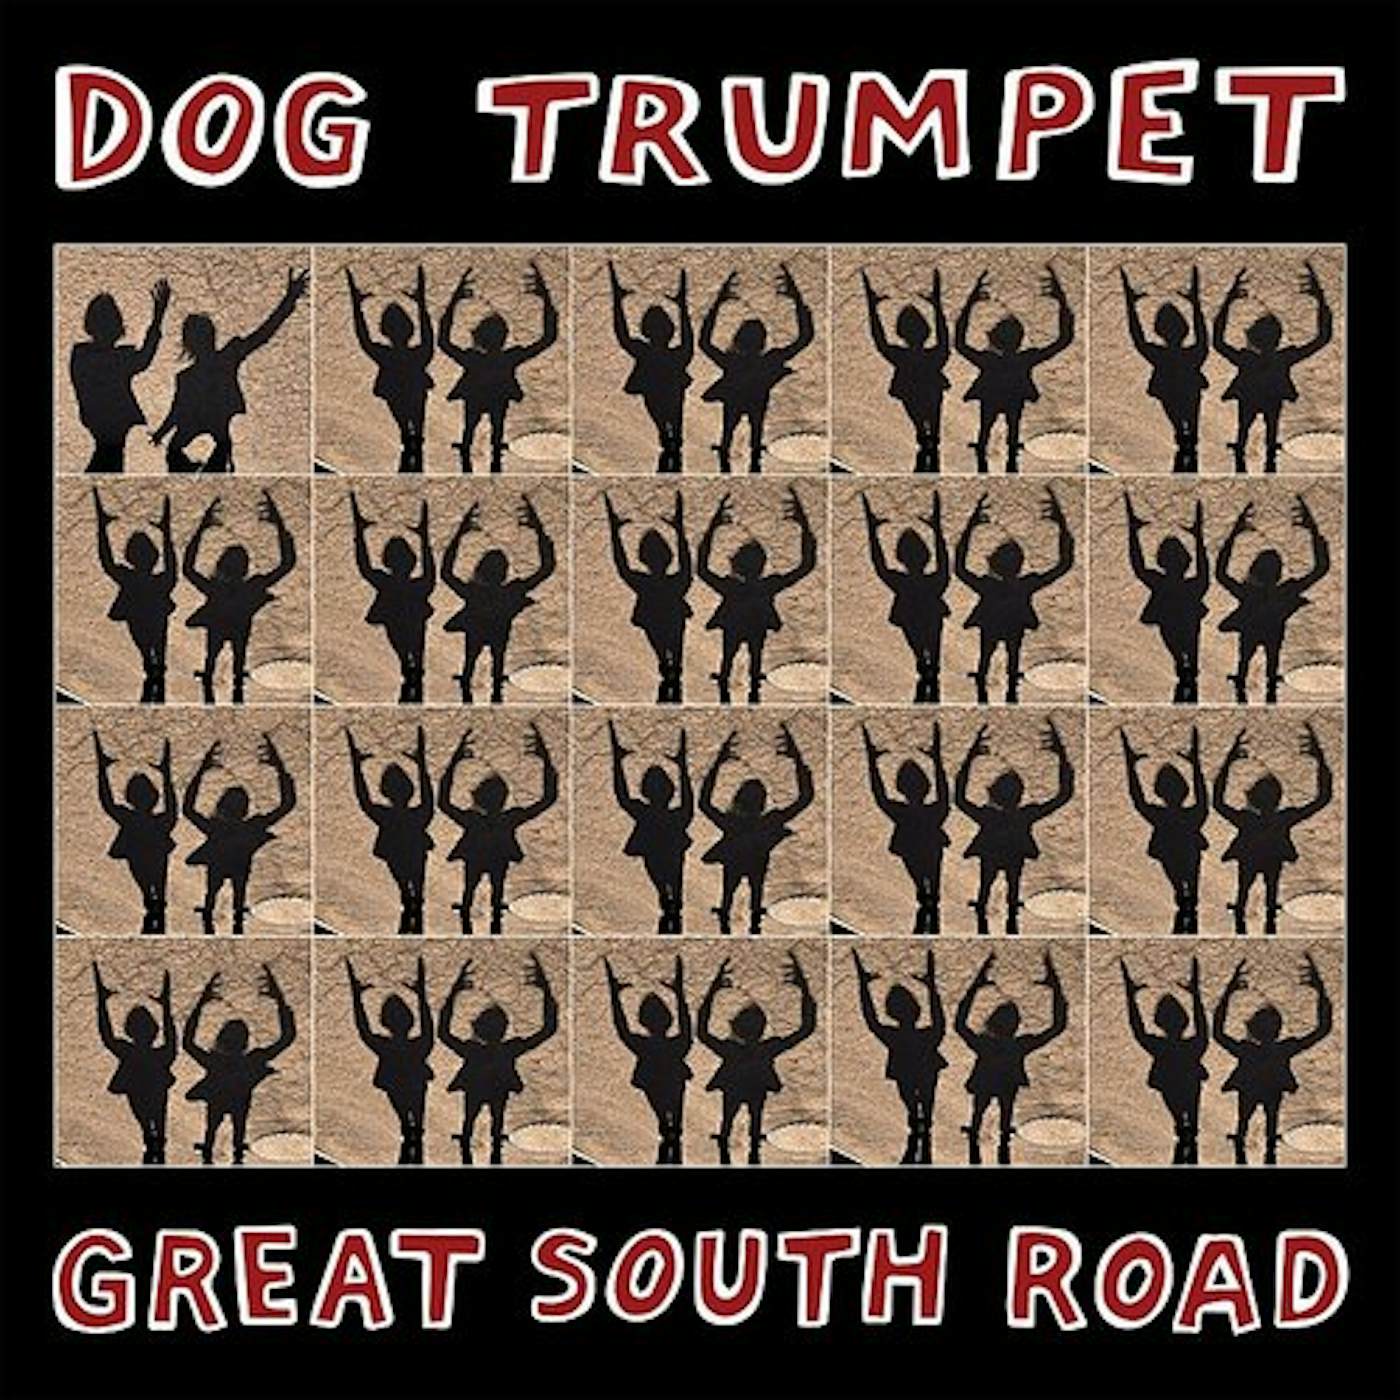 Dog Trumpet Great South Road Vinyl Record